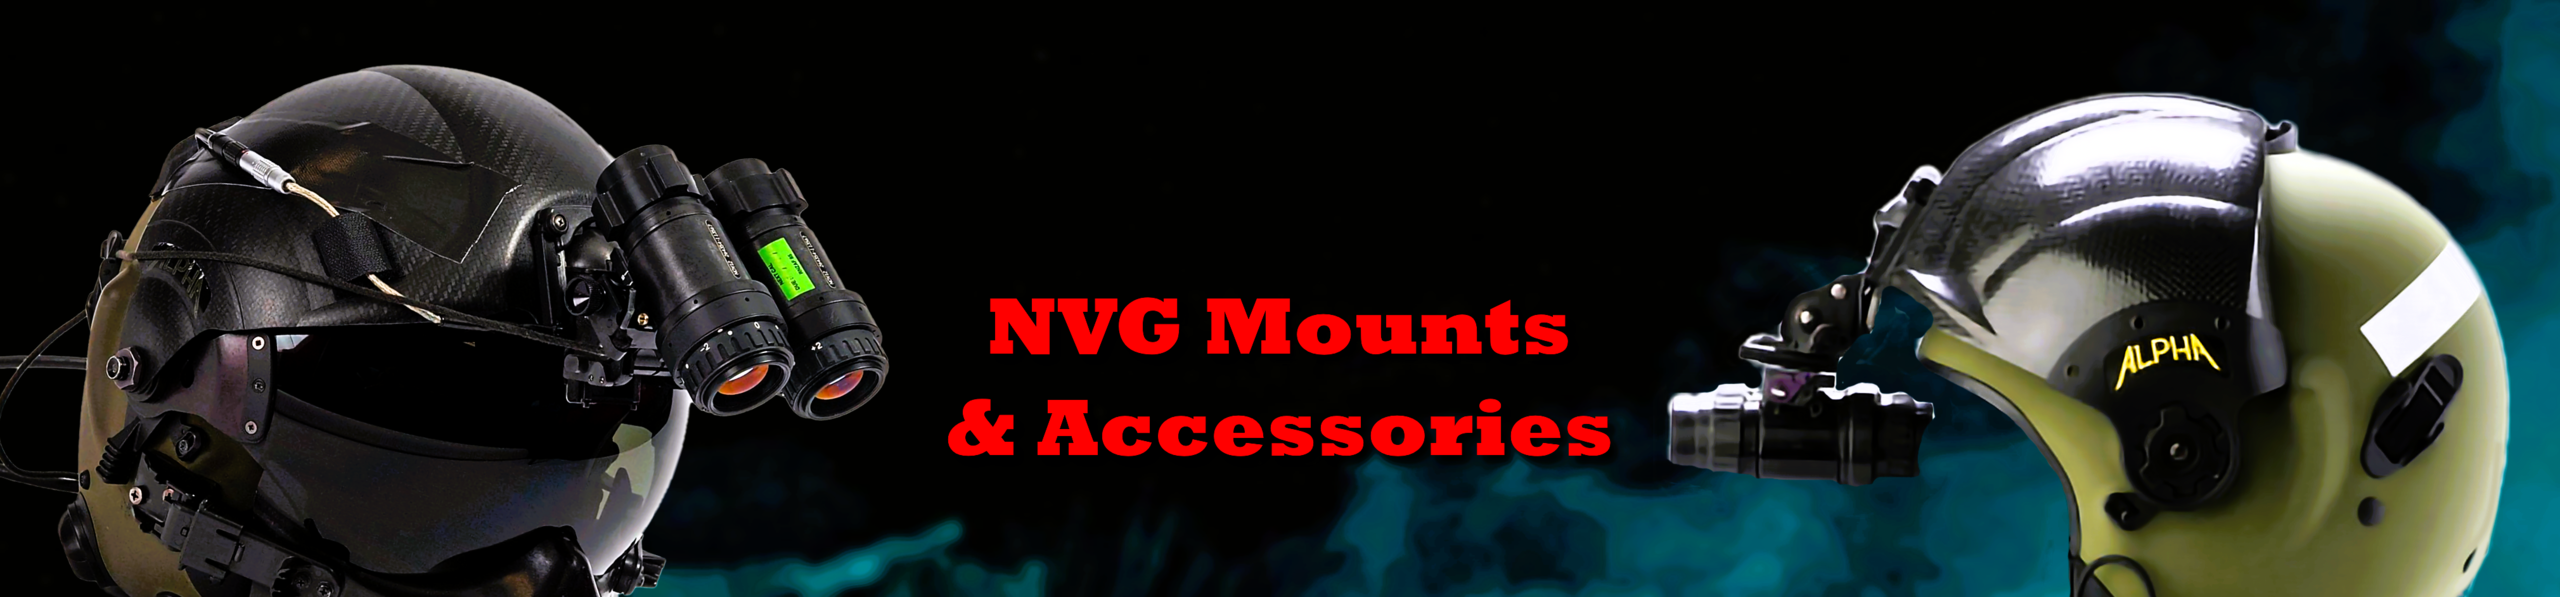 NVG Mounts and Accessories Cover Image